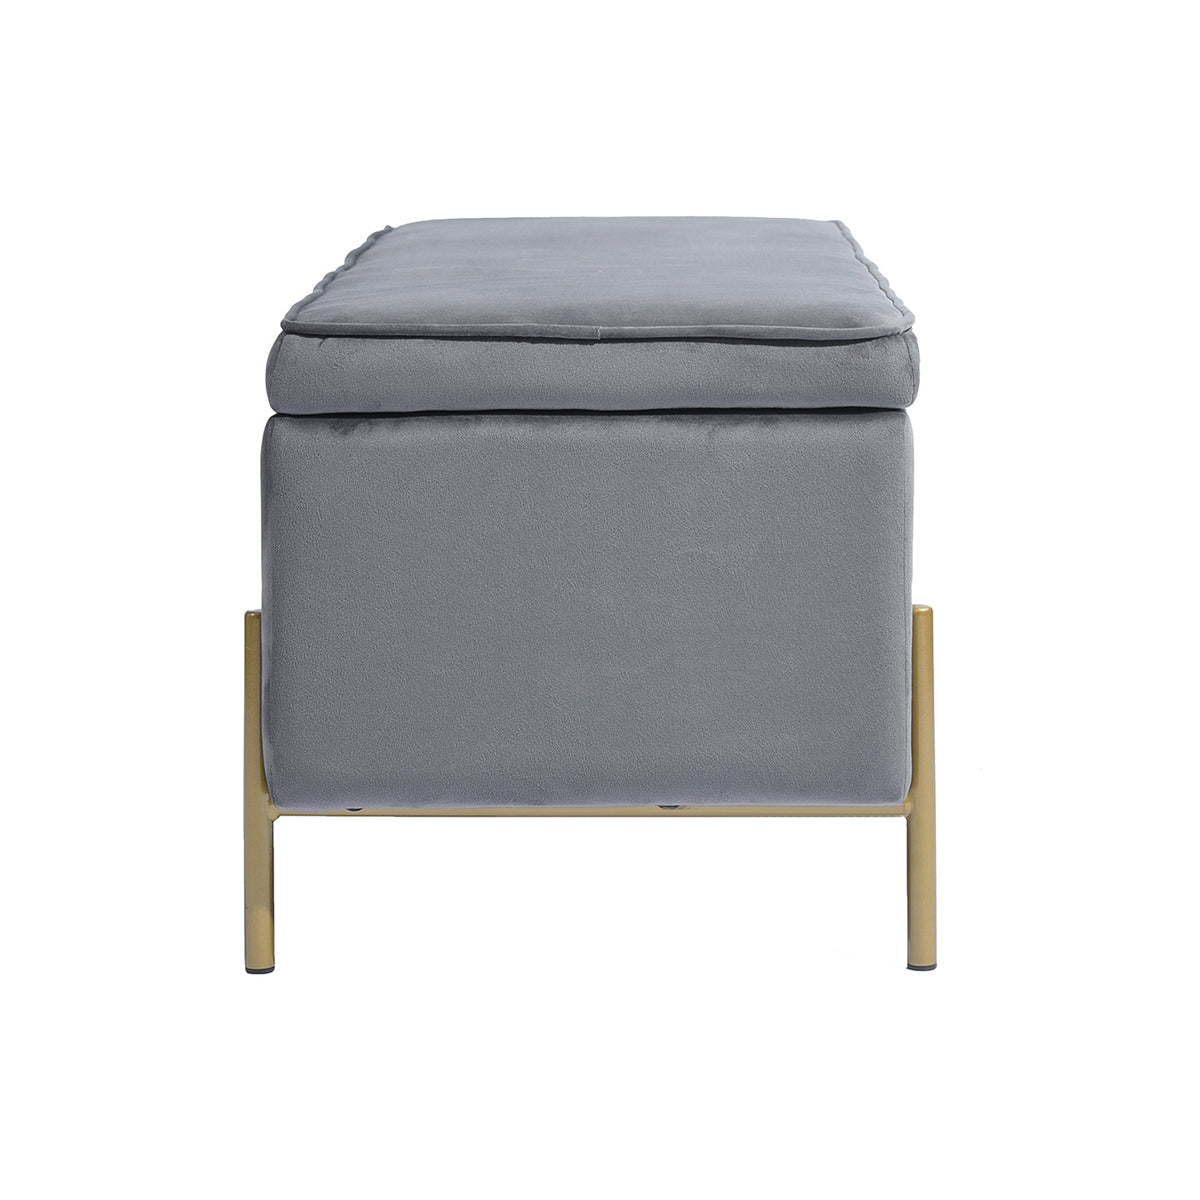 Contemporary storage bench with storage chest, in gray velvet and gold metal - TUDOR GRAY